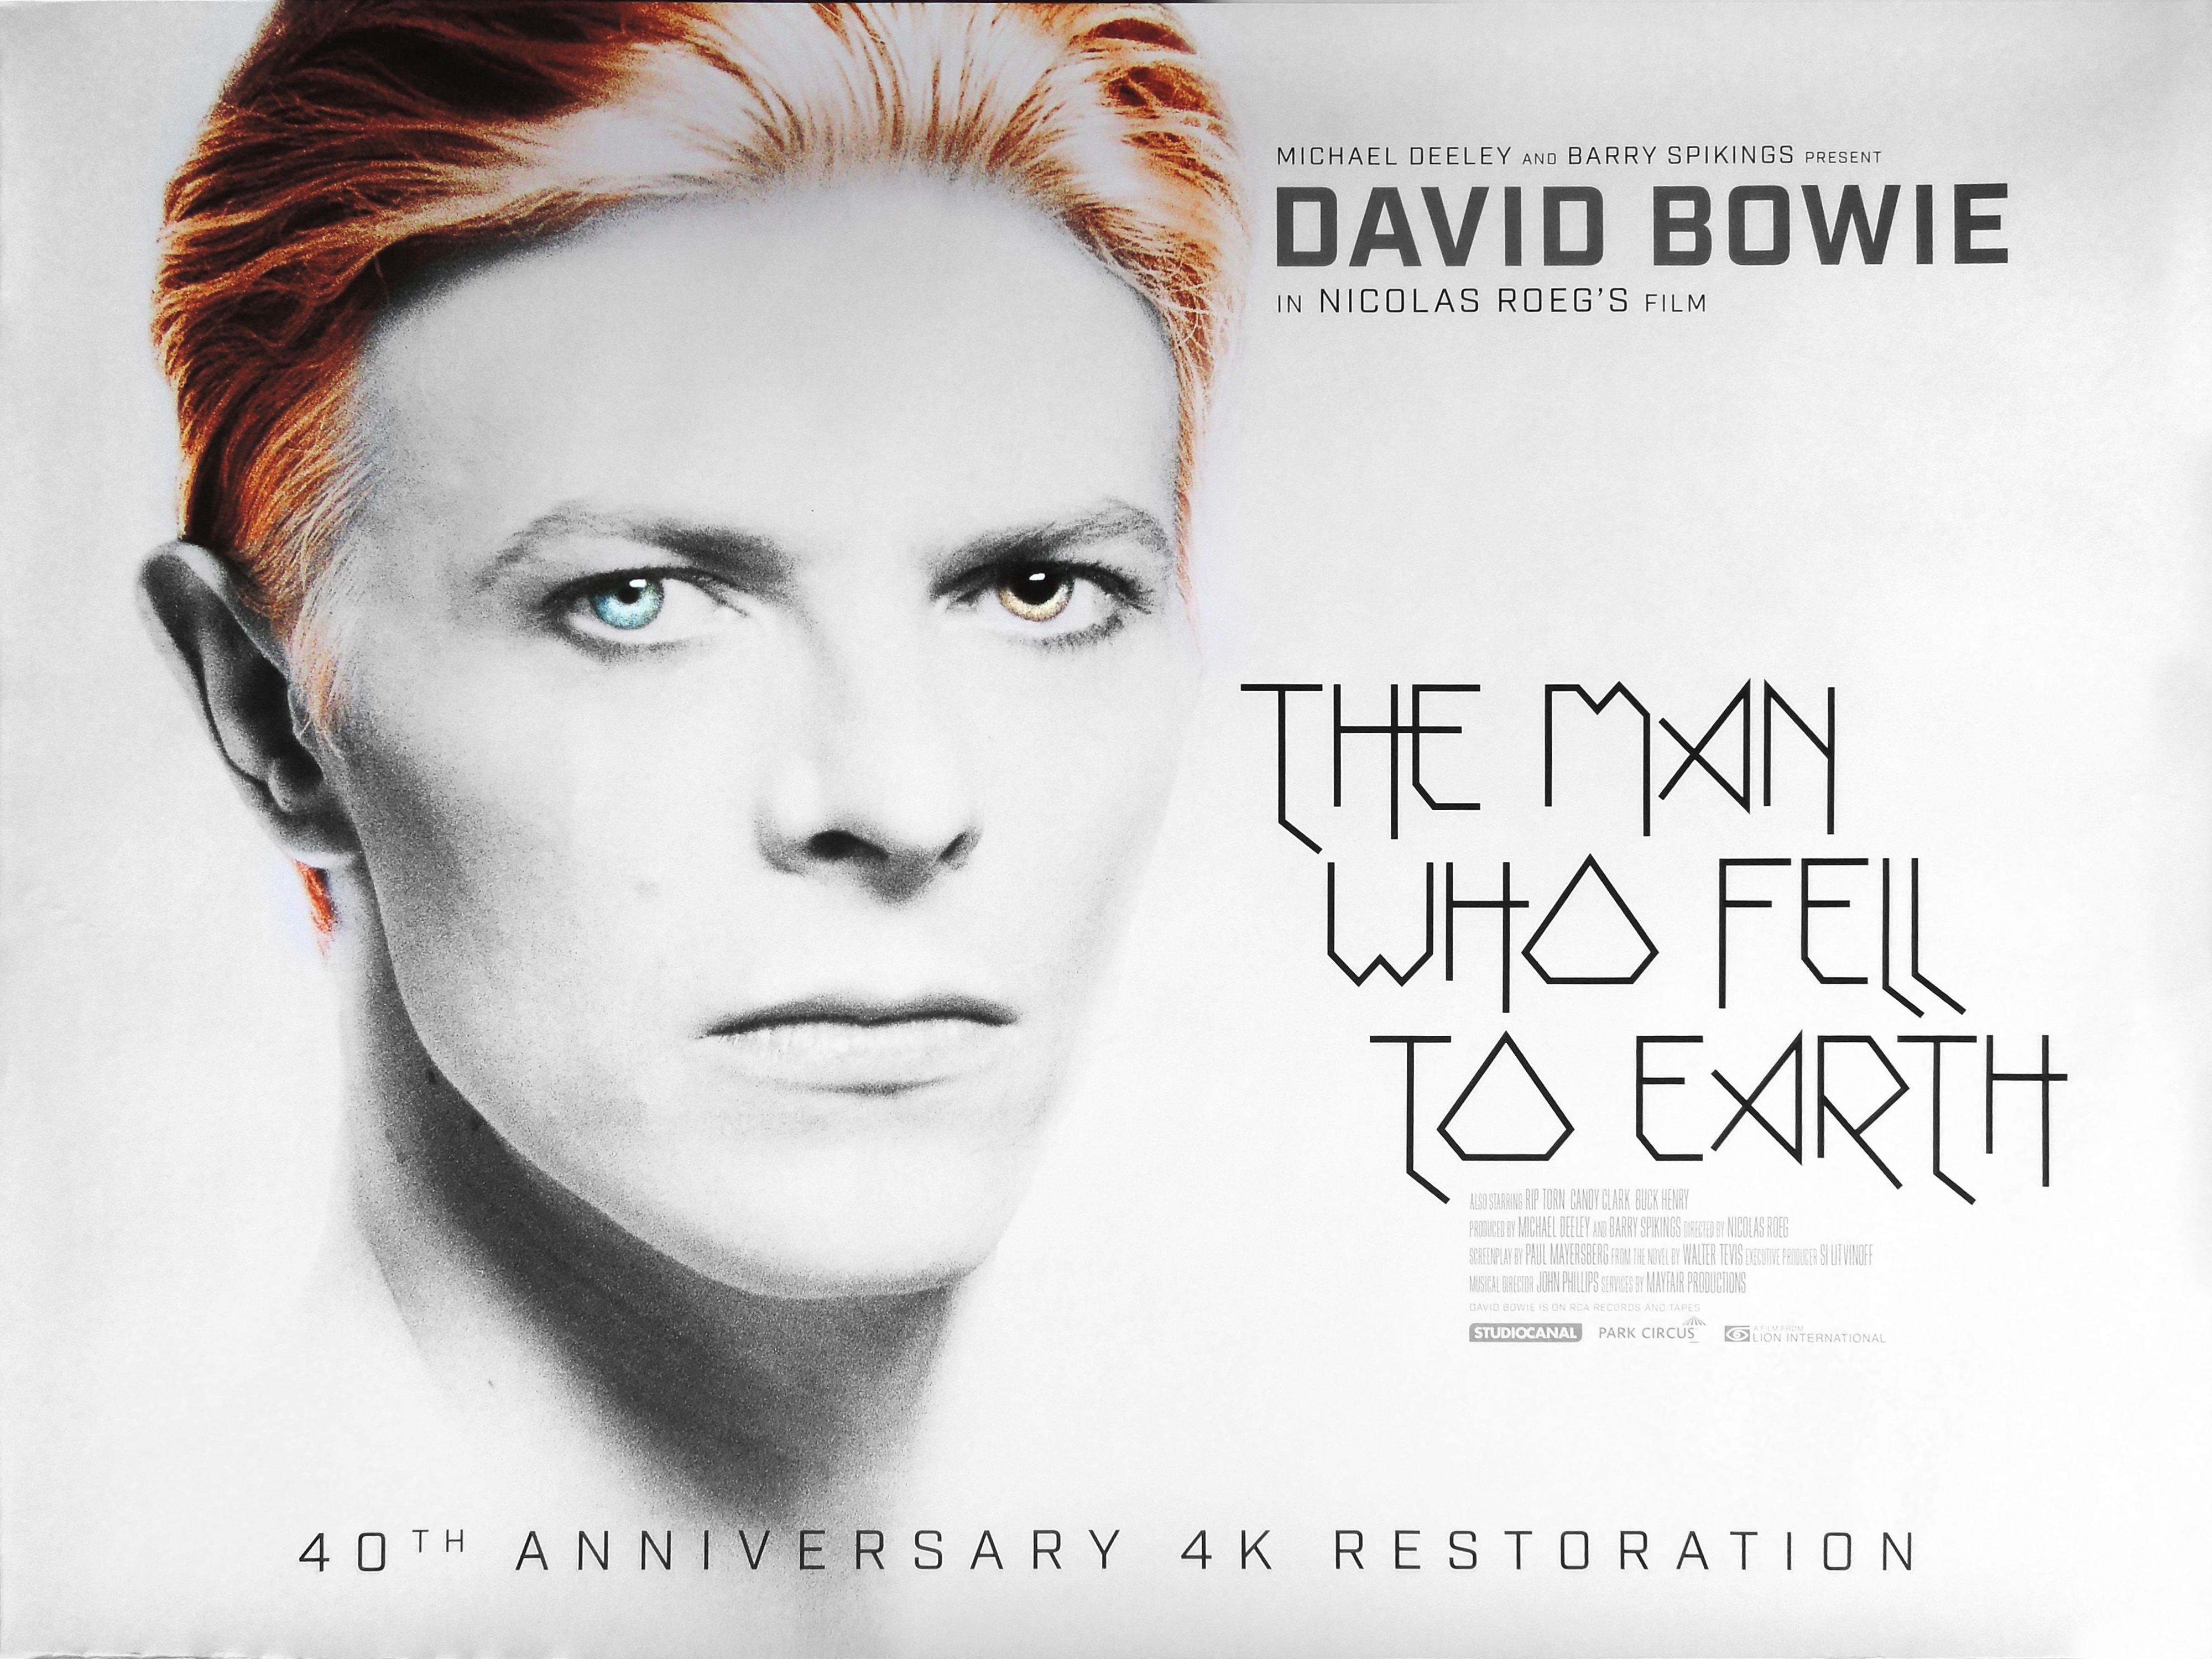 The Man Who Fell To Earth 2016 4k restoration re-release movie quad poster